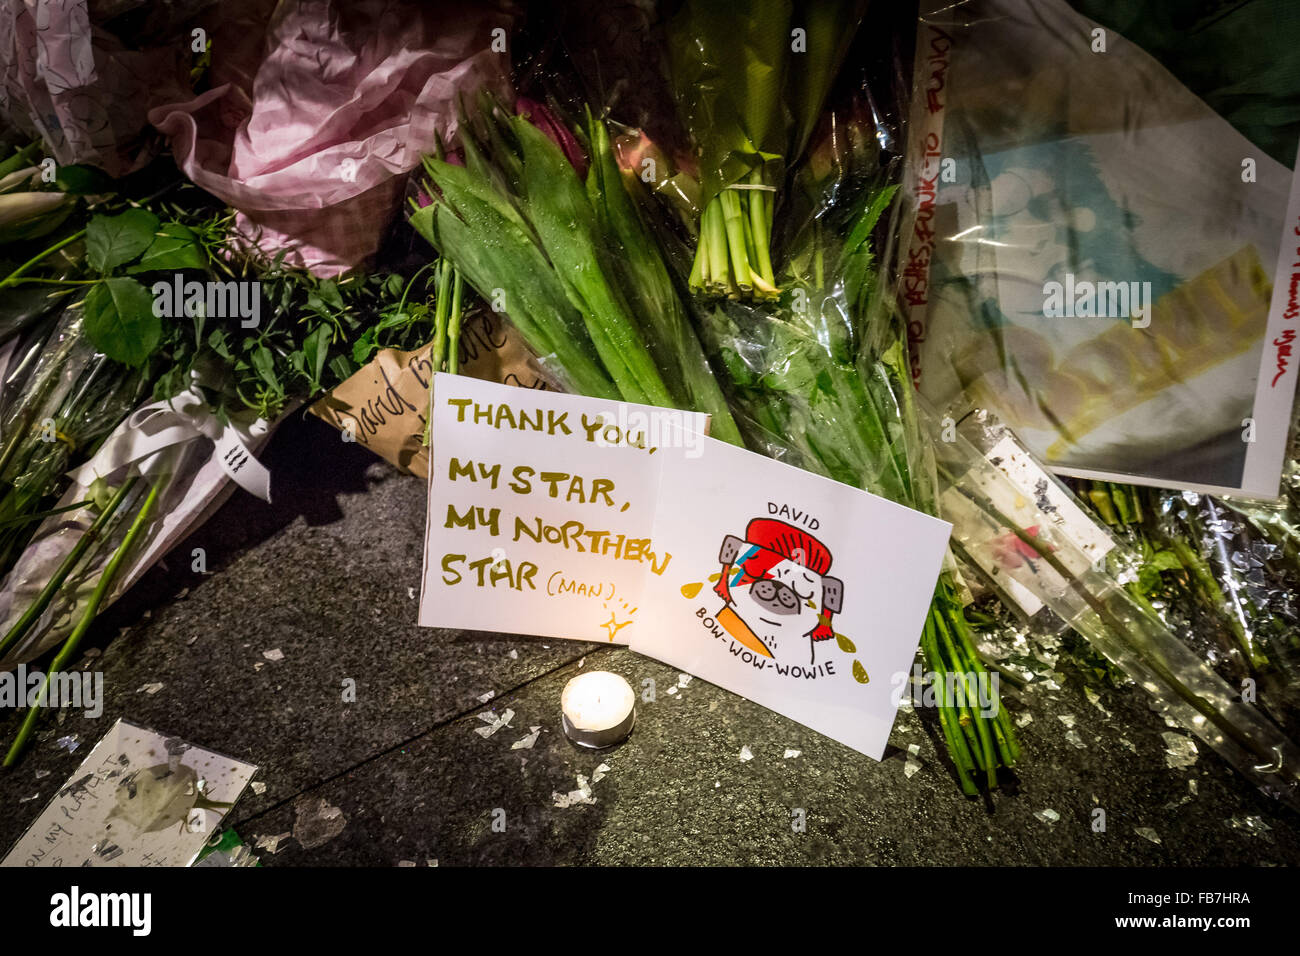 London, UK. 11th January, 2016. Fans gather at the David Bowie mural in Brixton, south London for an evening remembrance vigil, to lay flowers and leave messages. David Bowie (1947-2016) who passed away on 10 January 2016 Credit:  Guy Corbishley/Alamy Live News Stock Photo